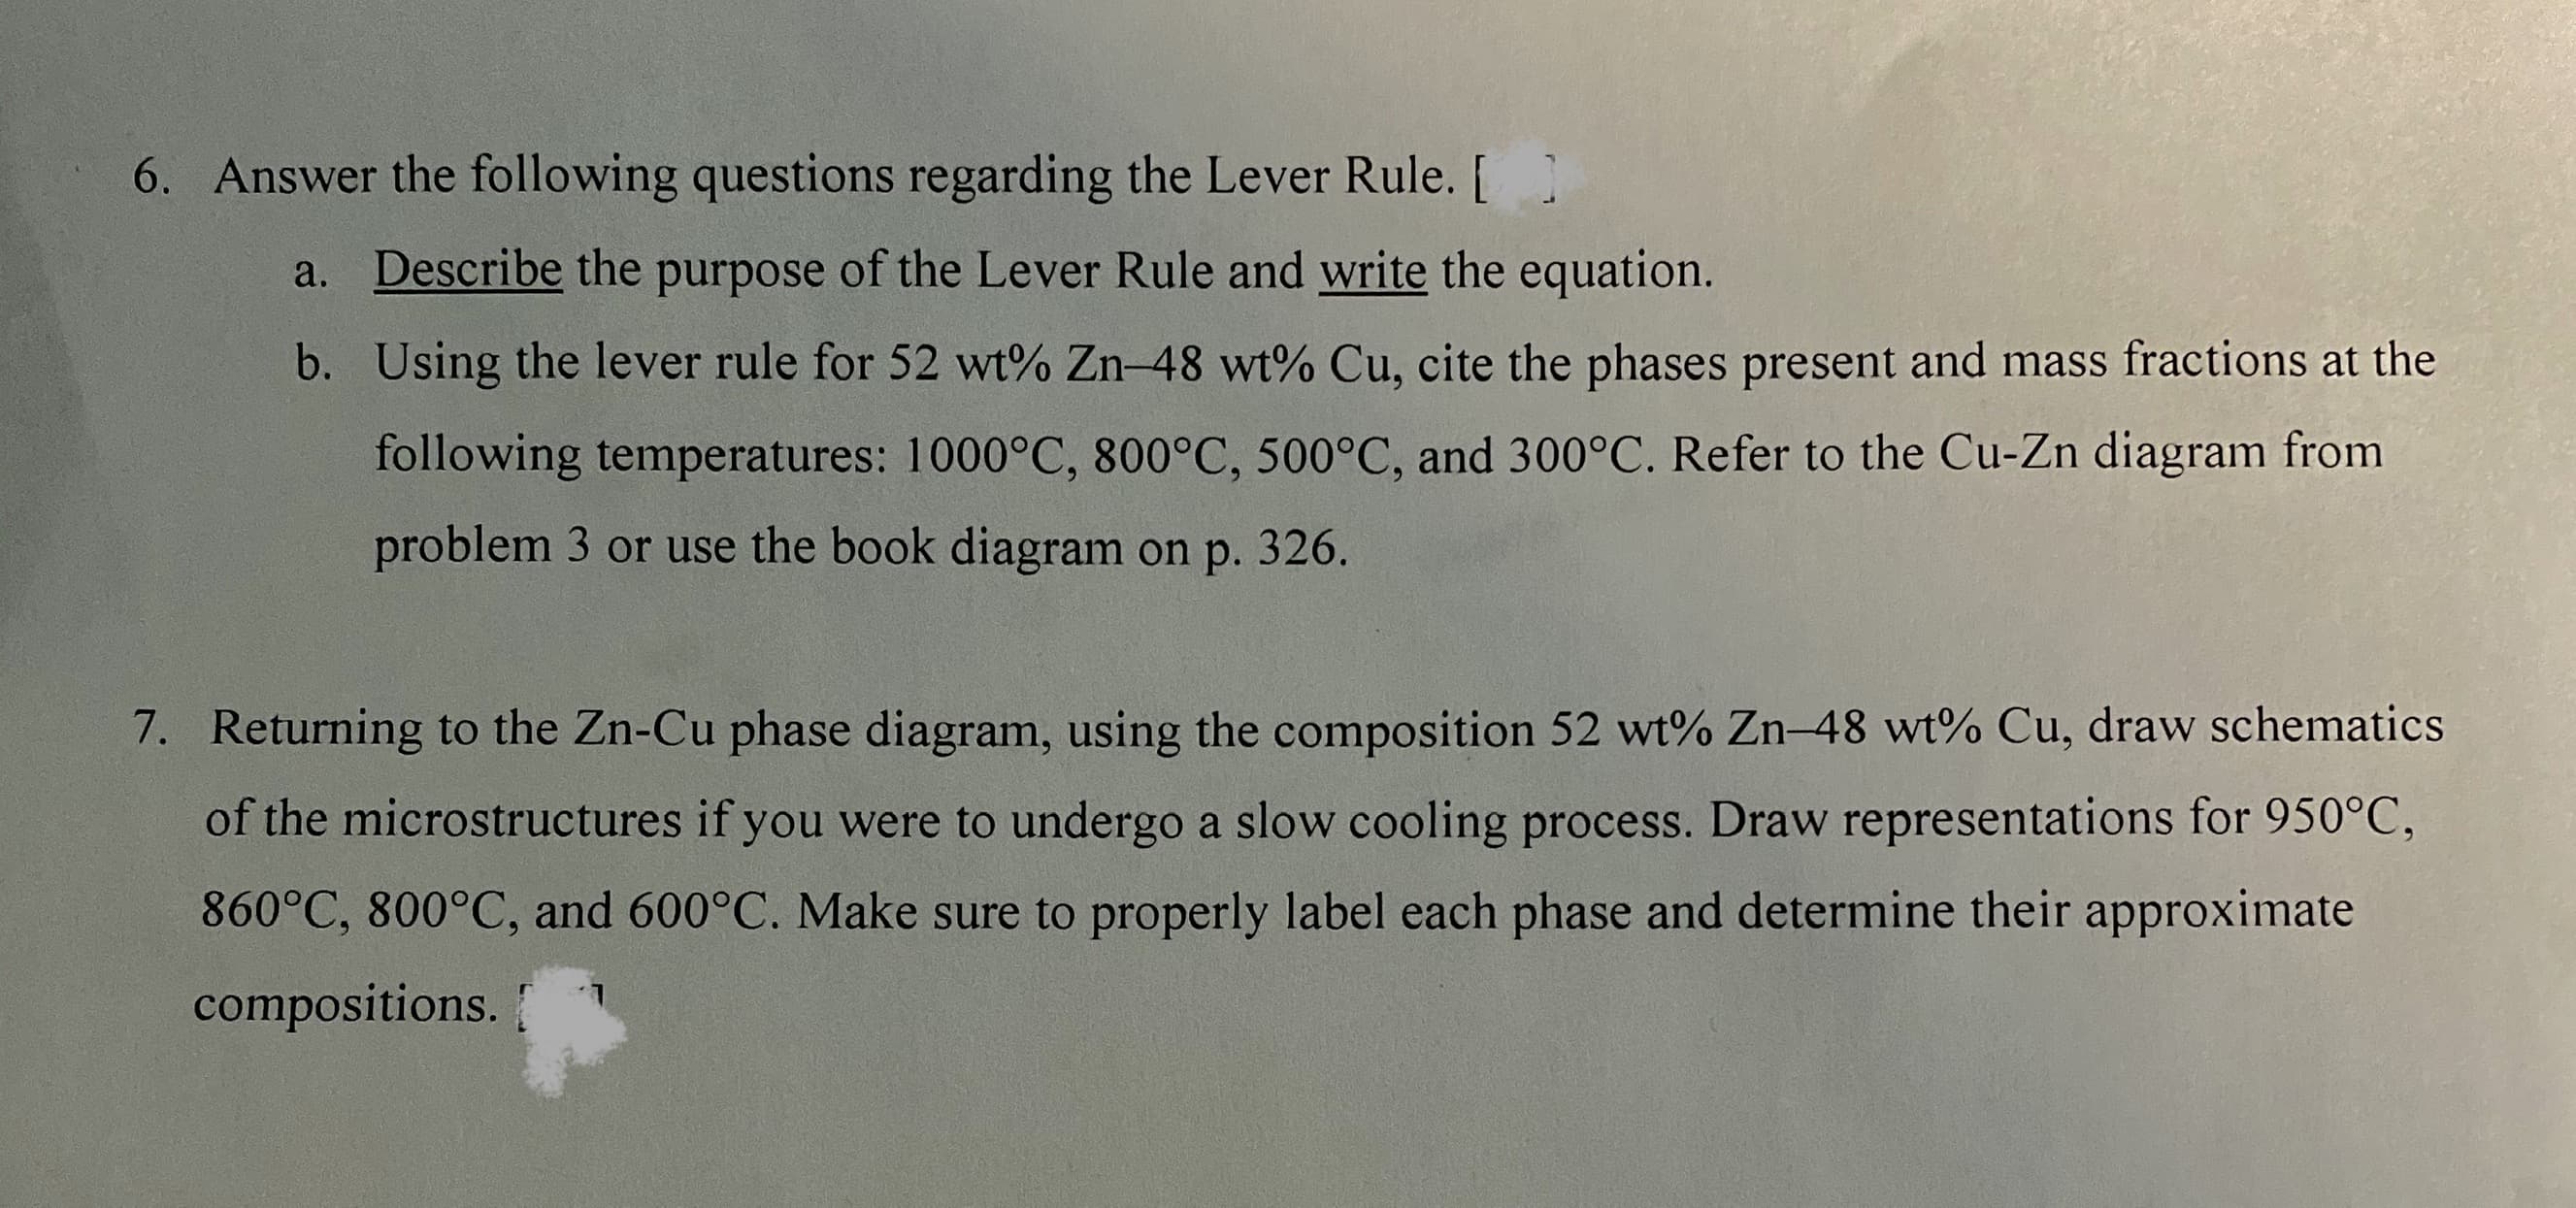 6. Answer the following questions regarding the Lever Rule. [
a. Describe the purpose of the Lever Rule and write the equation.
b. Using the lever rule for 52 wt% Zn-48 wt% Cu, cite the phases present and mass fractions at the
following temperatures: 1000°C, 800°C, 500°C, and 300°C. Refer to the Cu-Zn diagram from
problem 3 or use the book diagram on p. 326.
7. Returning to the Zn-Cu phase diagram, using the composition 52 wt% Zn-48 wt% Cu, draw schematics
of the microstructures if you were to undergo a slow cooling process. Draw representations for 950°C,
860°C, 800°C, and 600°C. Make sure to properly label each phase and determine their approximate
compositions.
